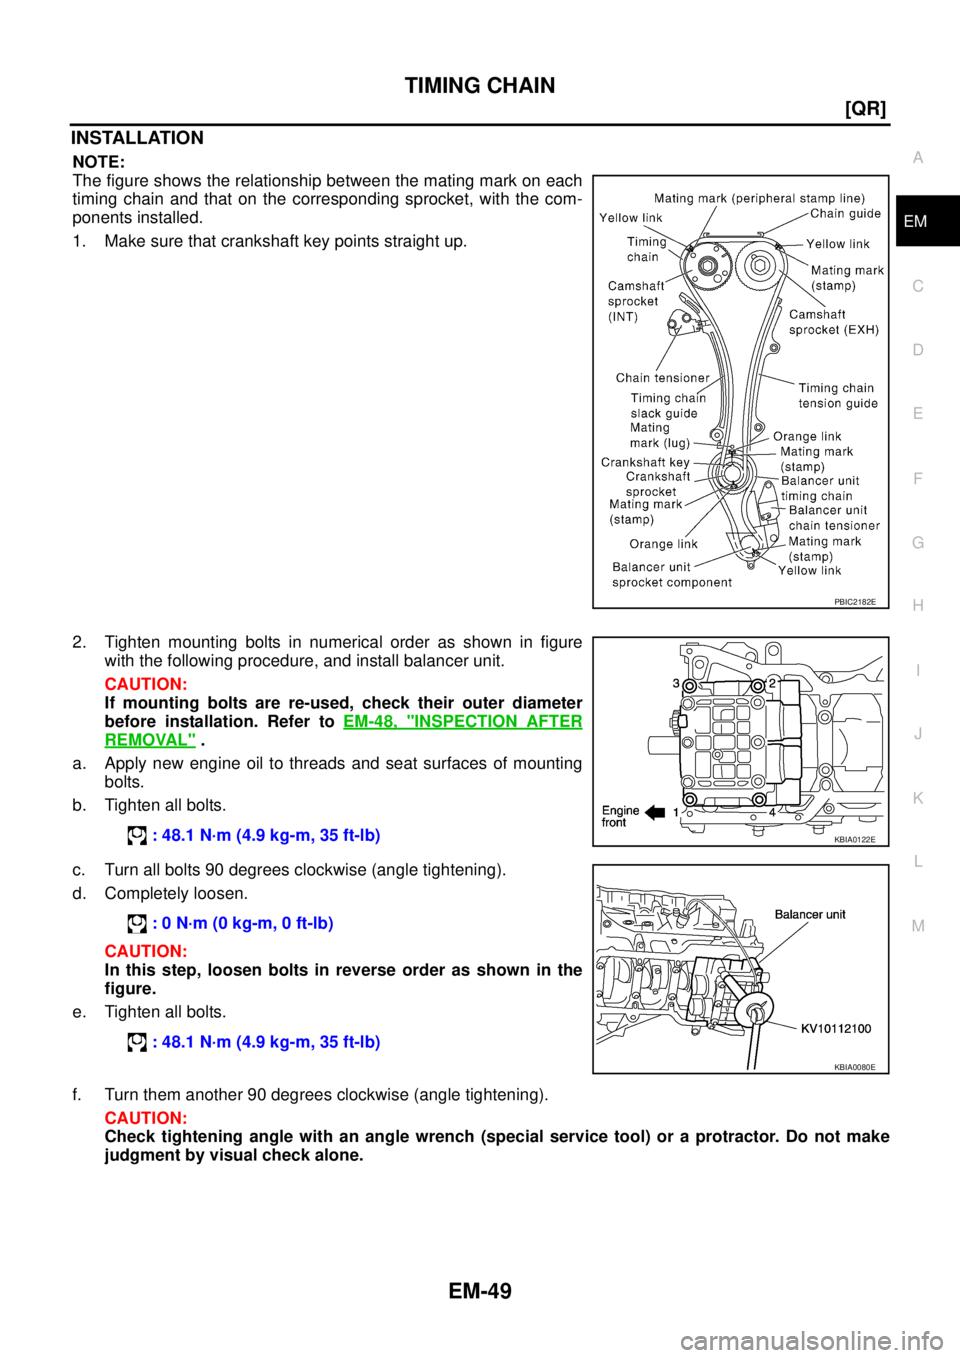 NISSAN X-TRAIL 2003  Service User Guide TIMING CHAIN
EM-49
[QR]
C
D
E
F
G
H
I
J
K
L
MA
EM
 
INSTALLATION
NOTE:
The figure shows the relationship between the mating mark on each
timing chain and that on the corresponding sprocket, with the c